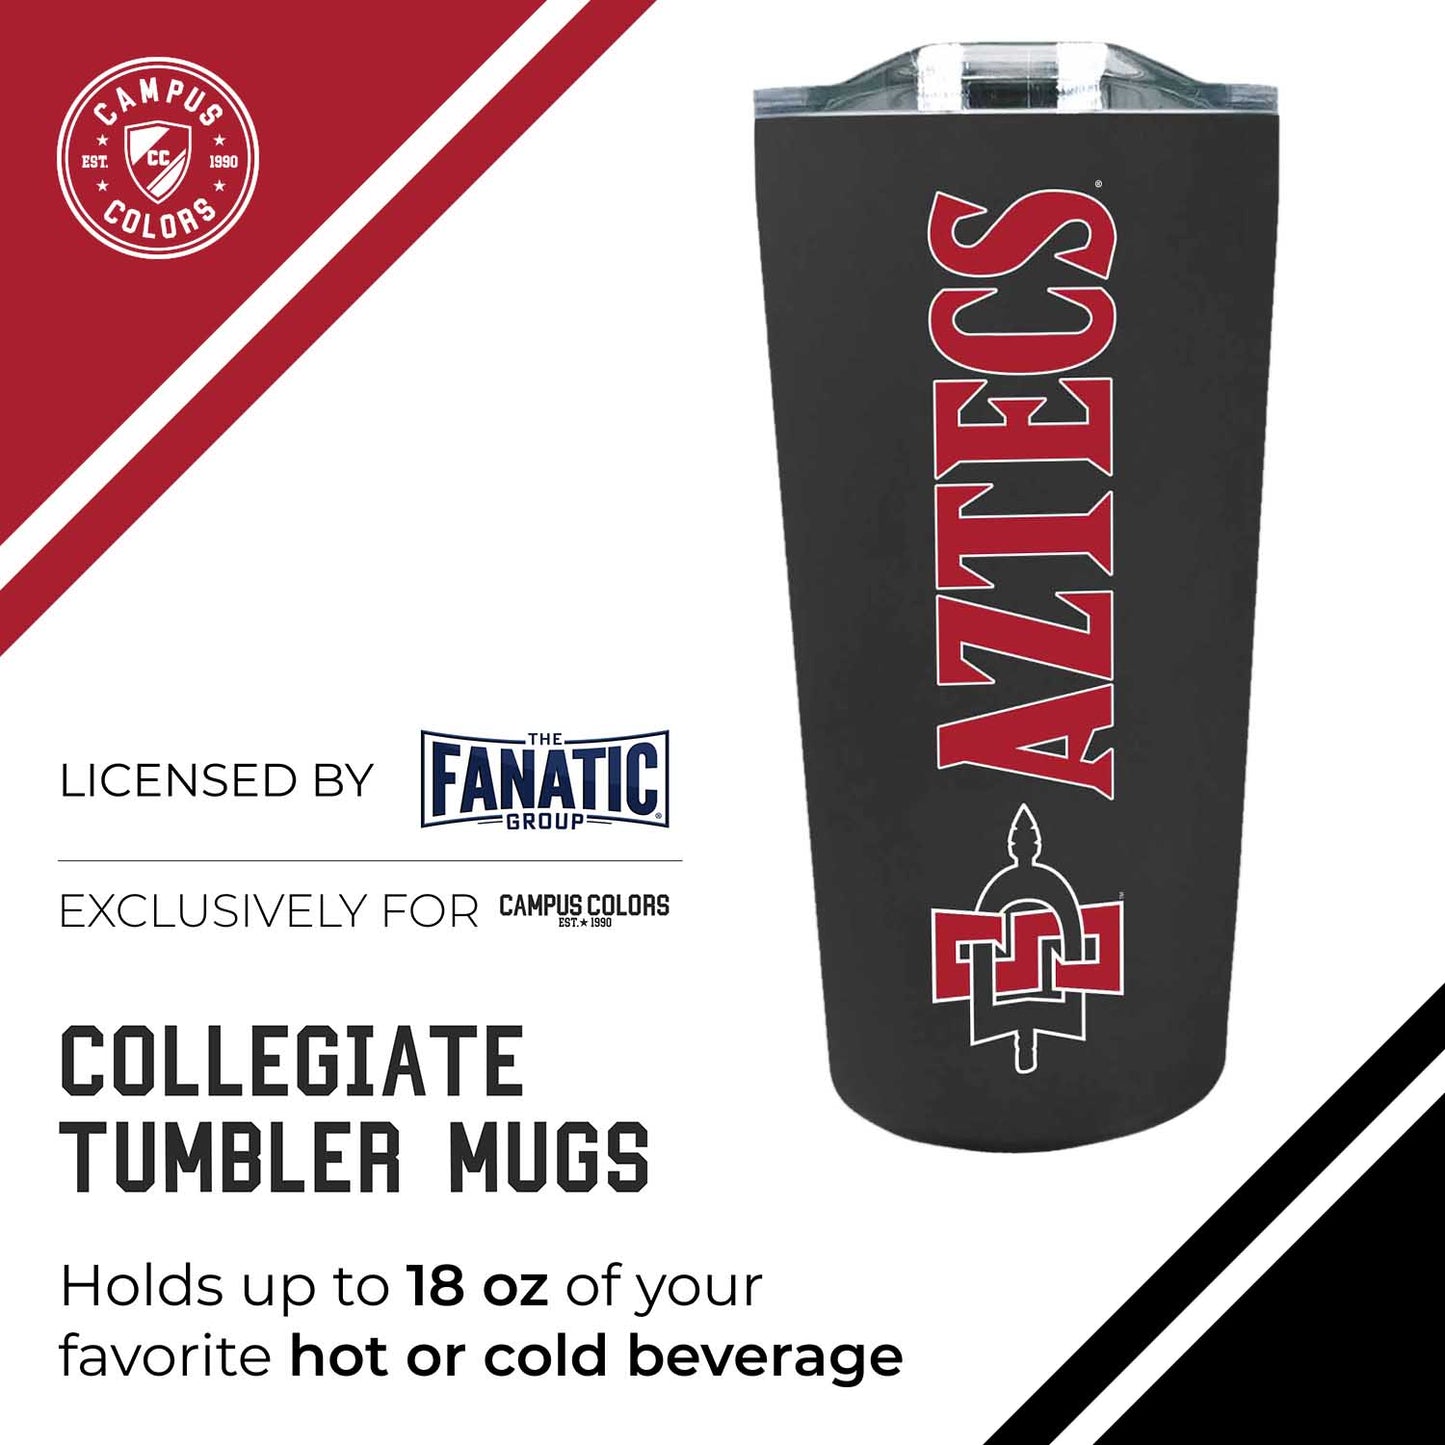 San Diego State Aztecs NCAA Stainless Steel Tumbler perfect for Gameday - Black